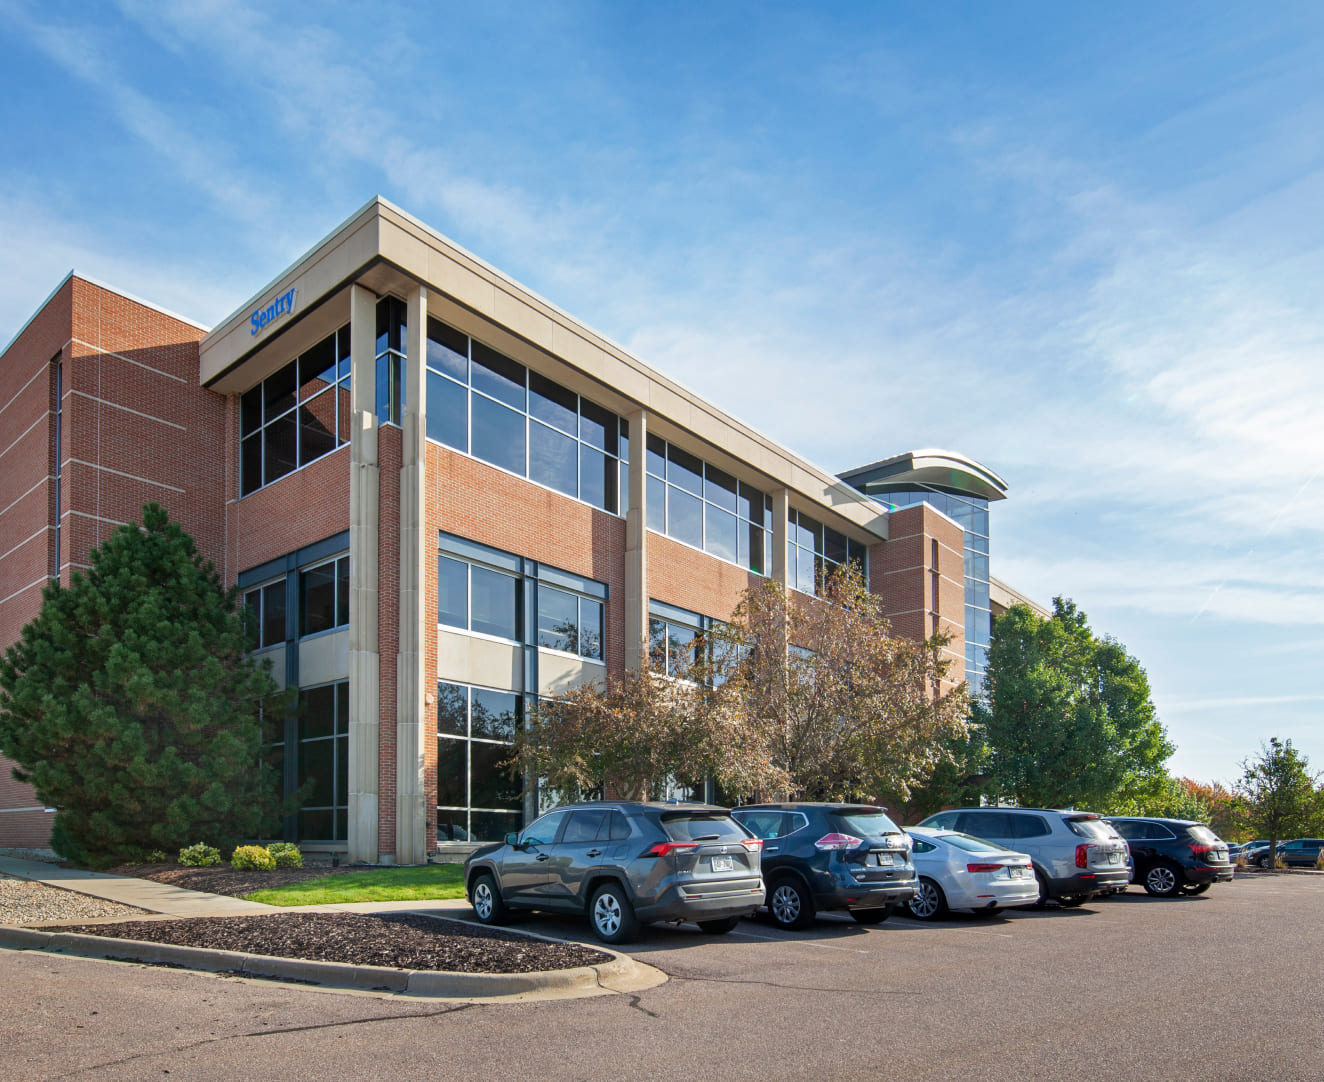 The parking lot and office building at 5100 Eastpark Boulevard in Madison, WI.